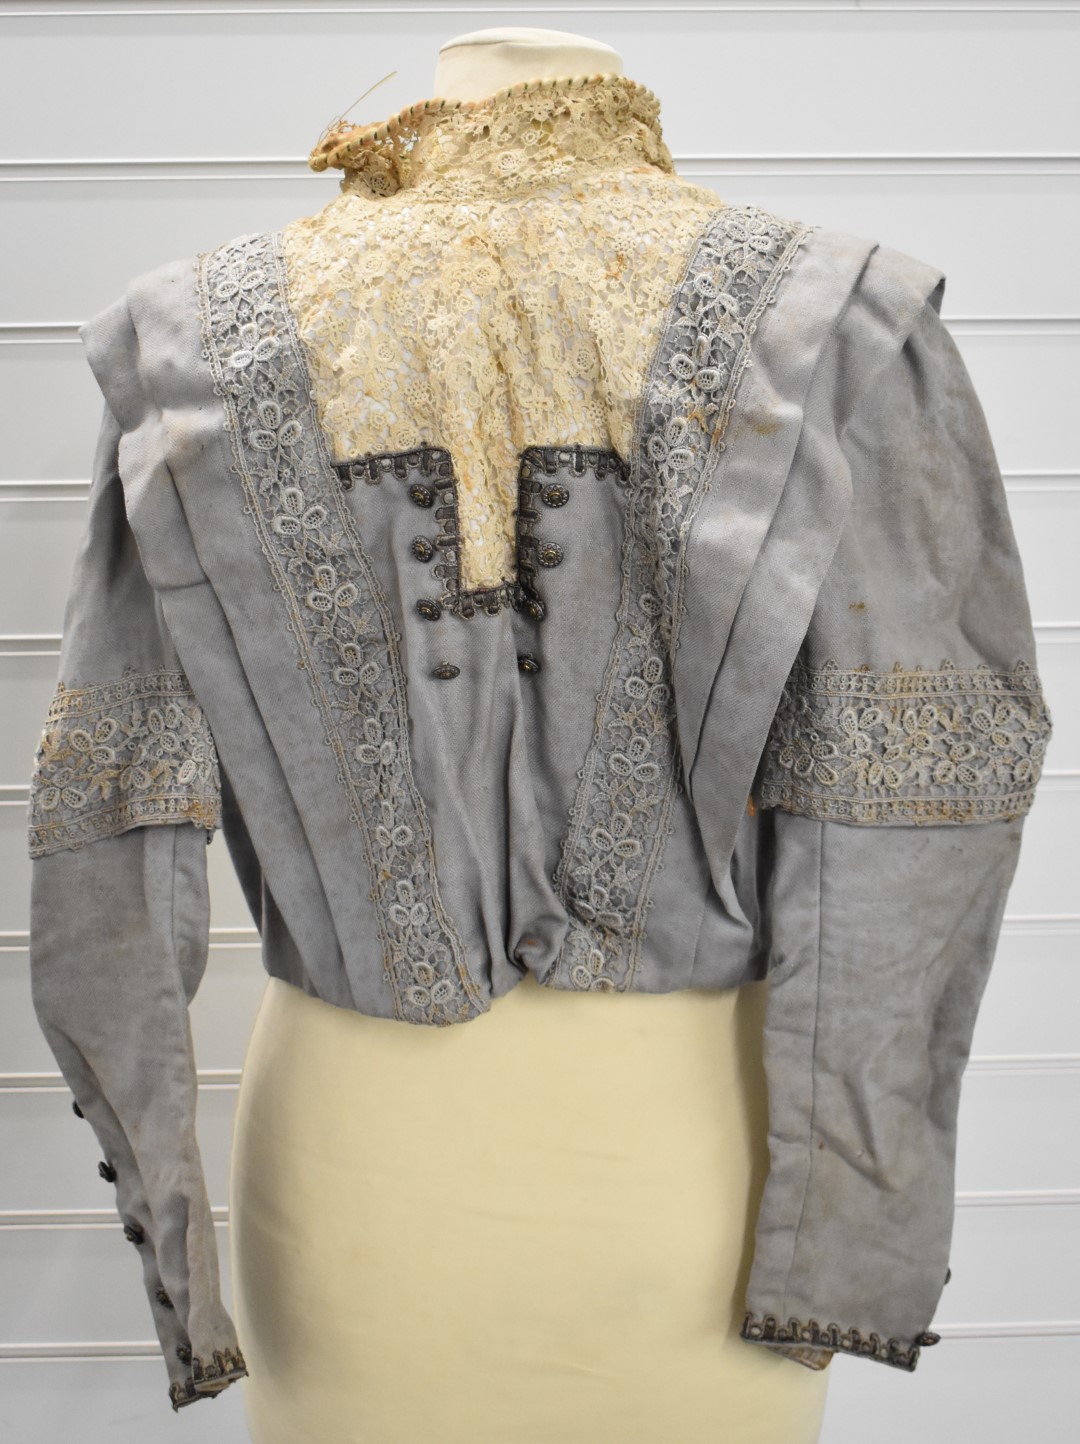 Victorian silk jacket with lace collar and trim, size small - Image 5 of 16